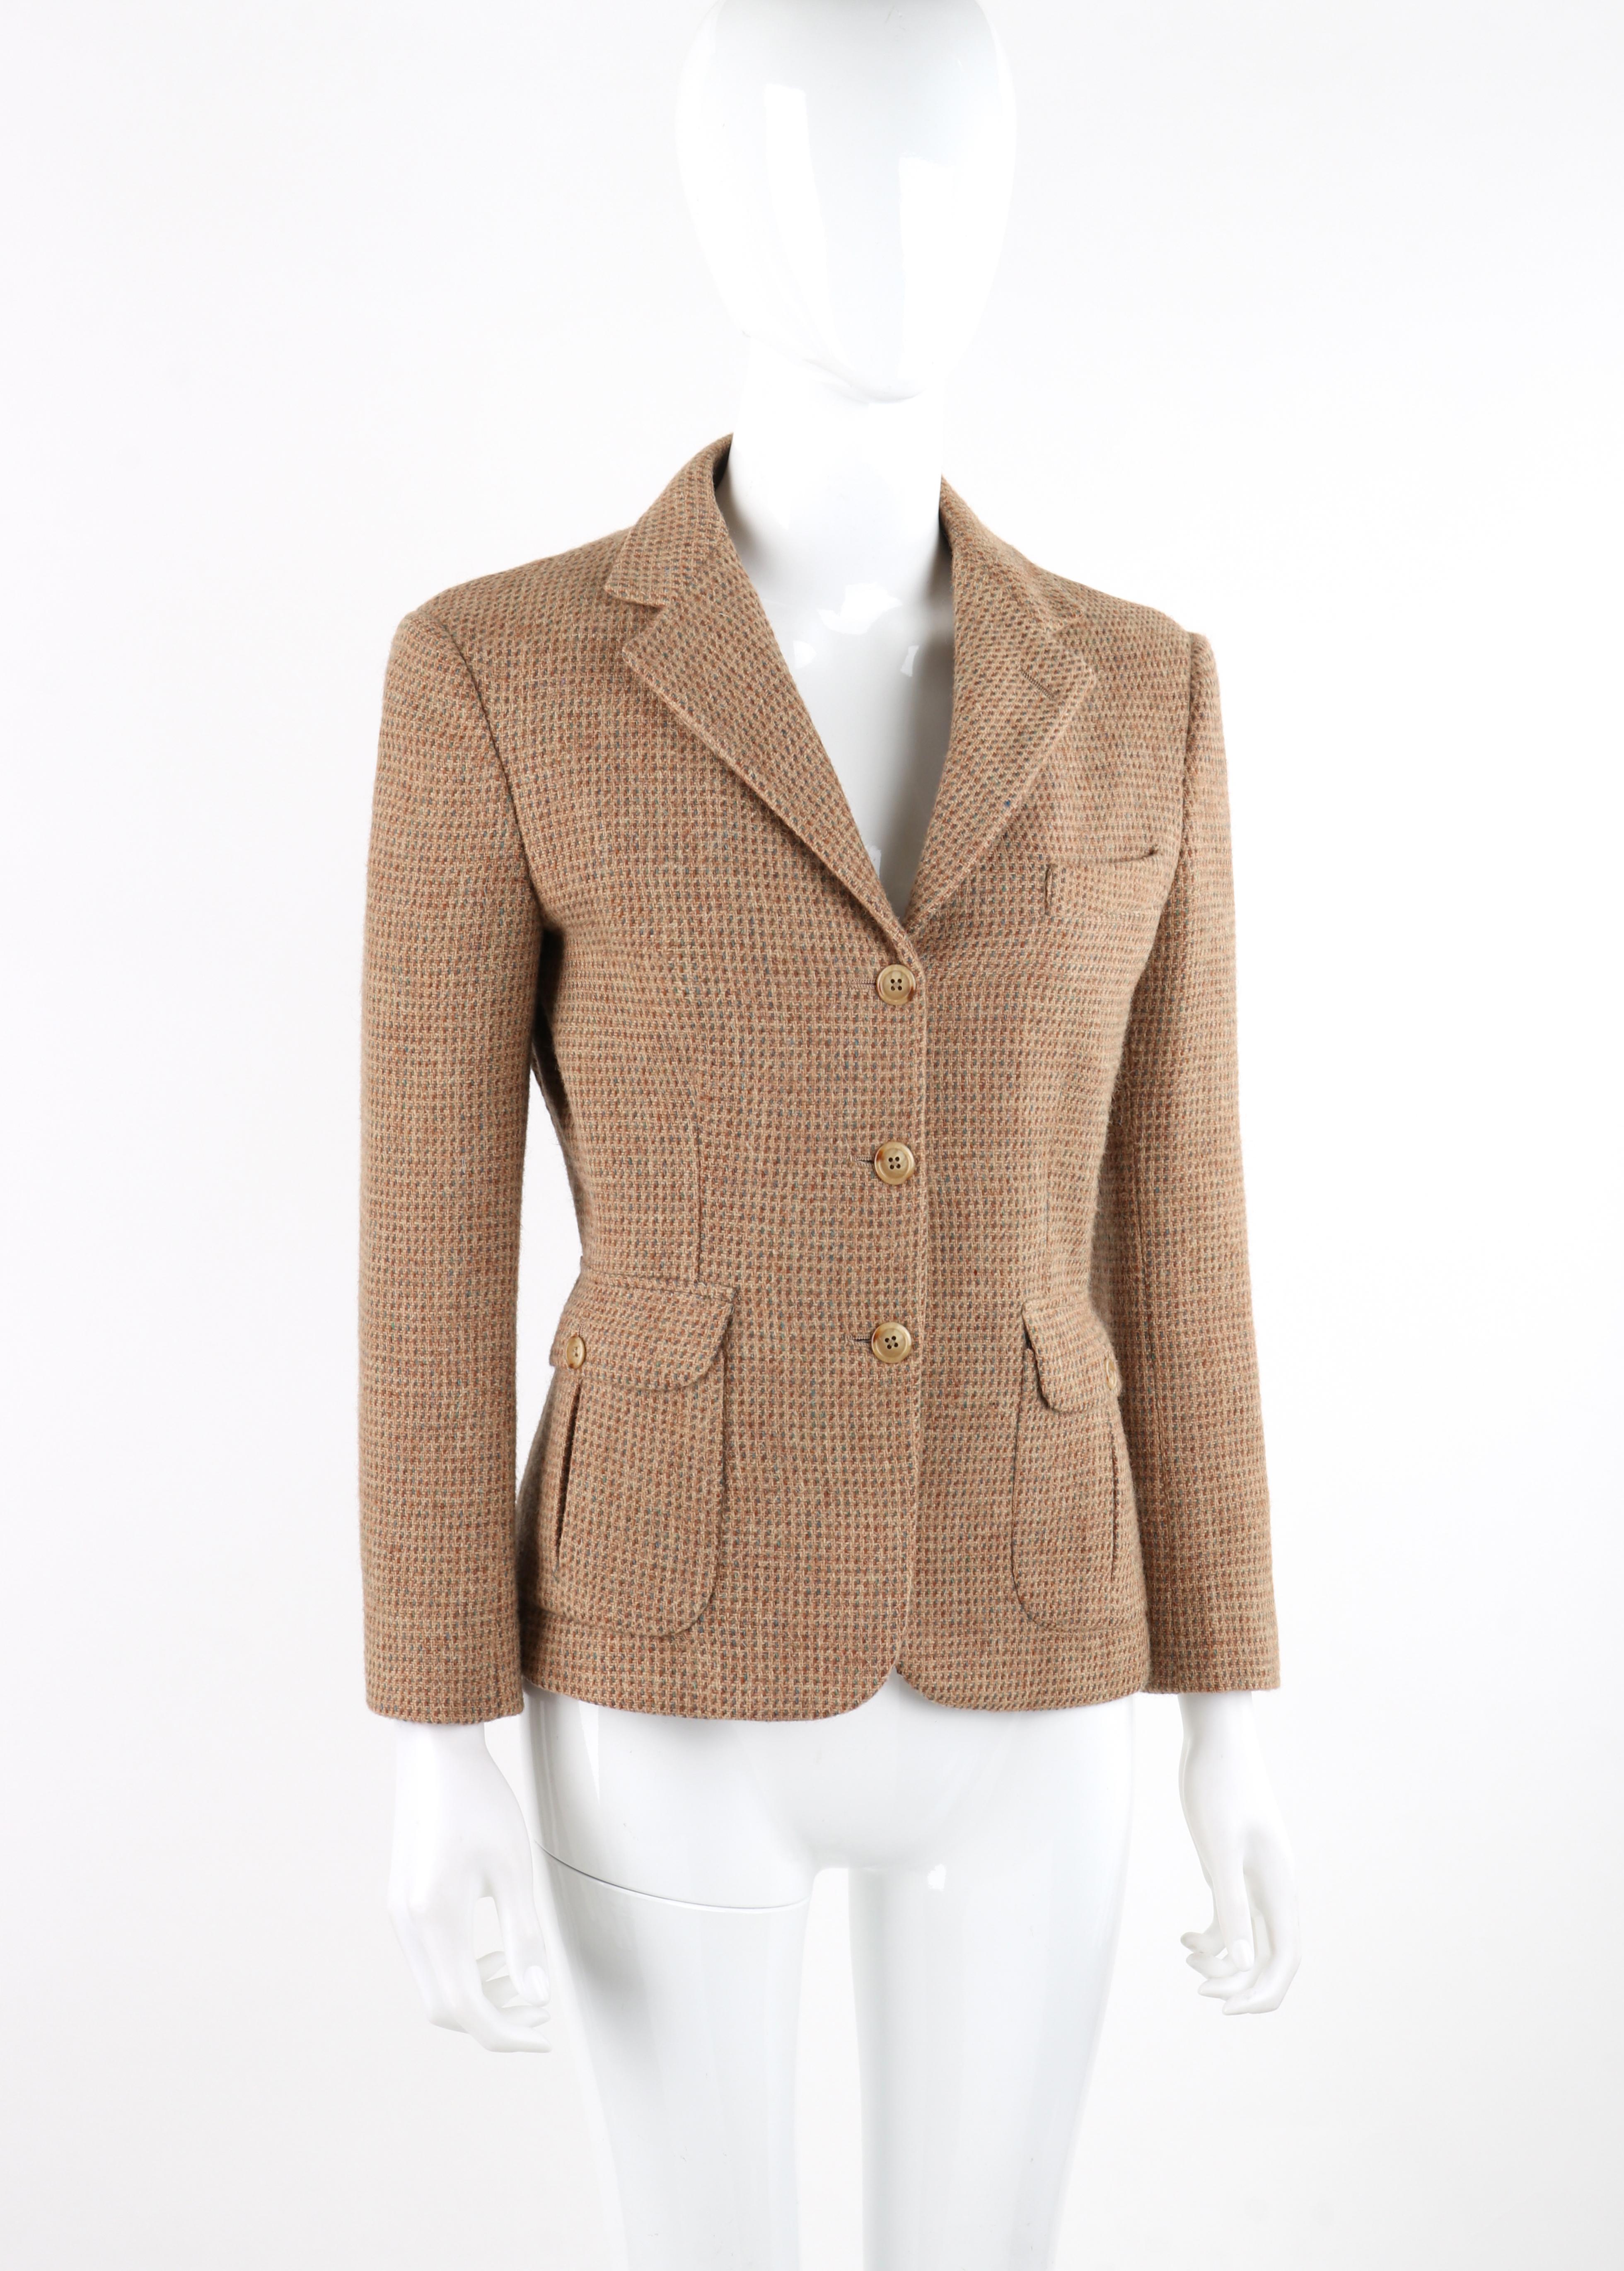 RALPH LAUREN c.1970's Brown Tan Tweed Wool Fitted Button Up Blazer Coat Jacket  In Good Condition For Sale In Thiensville, WI